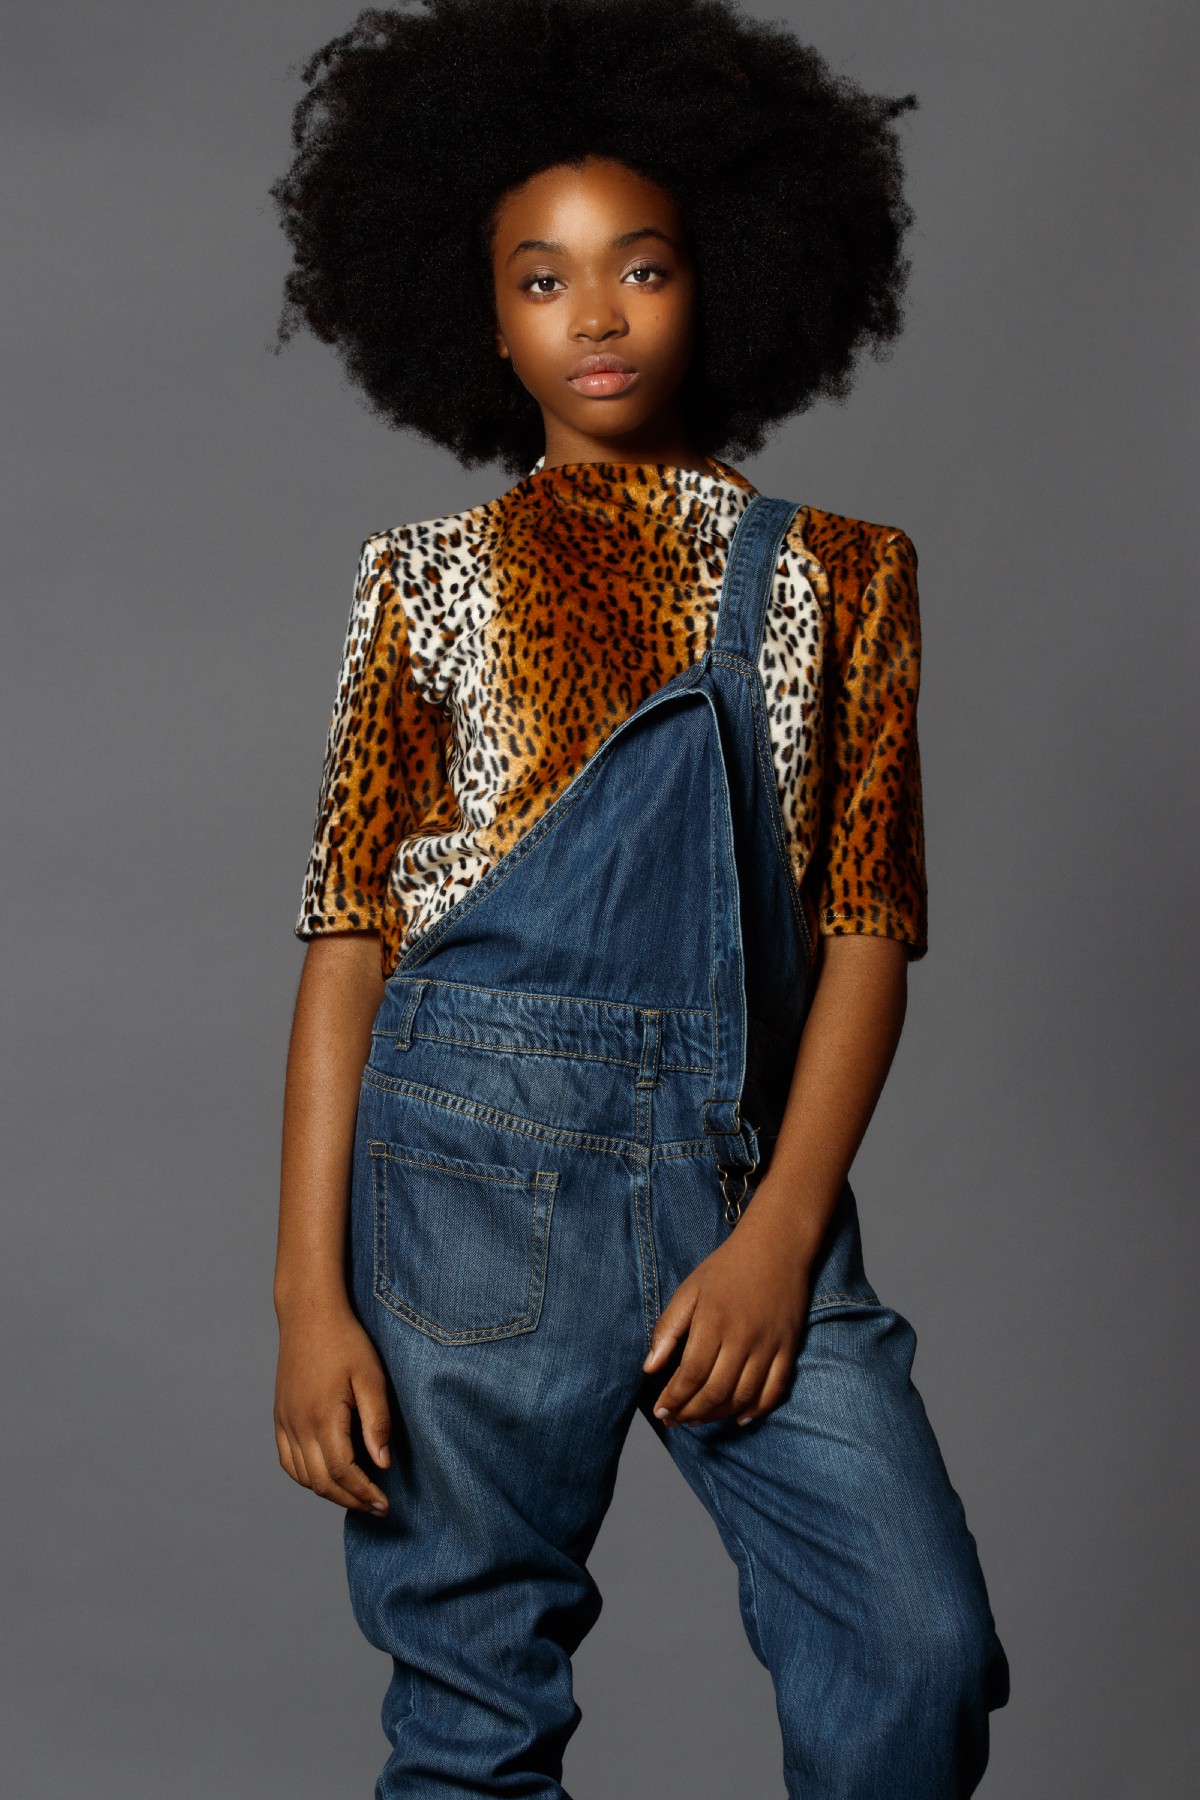 Celai West 12 Years Old Fashion Professional Model & Activist Current ...